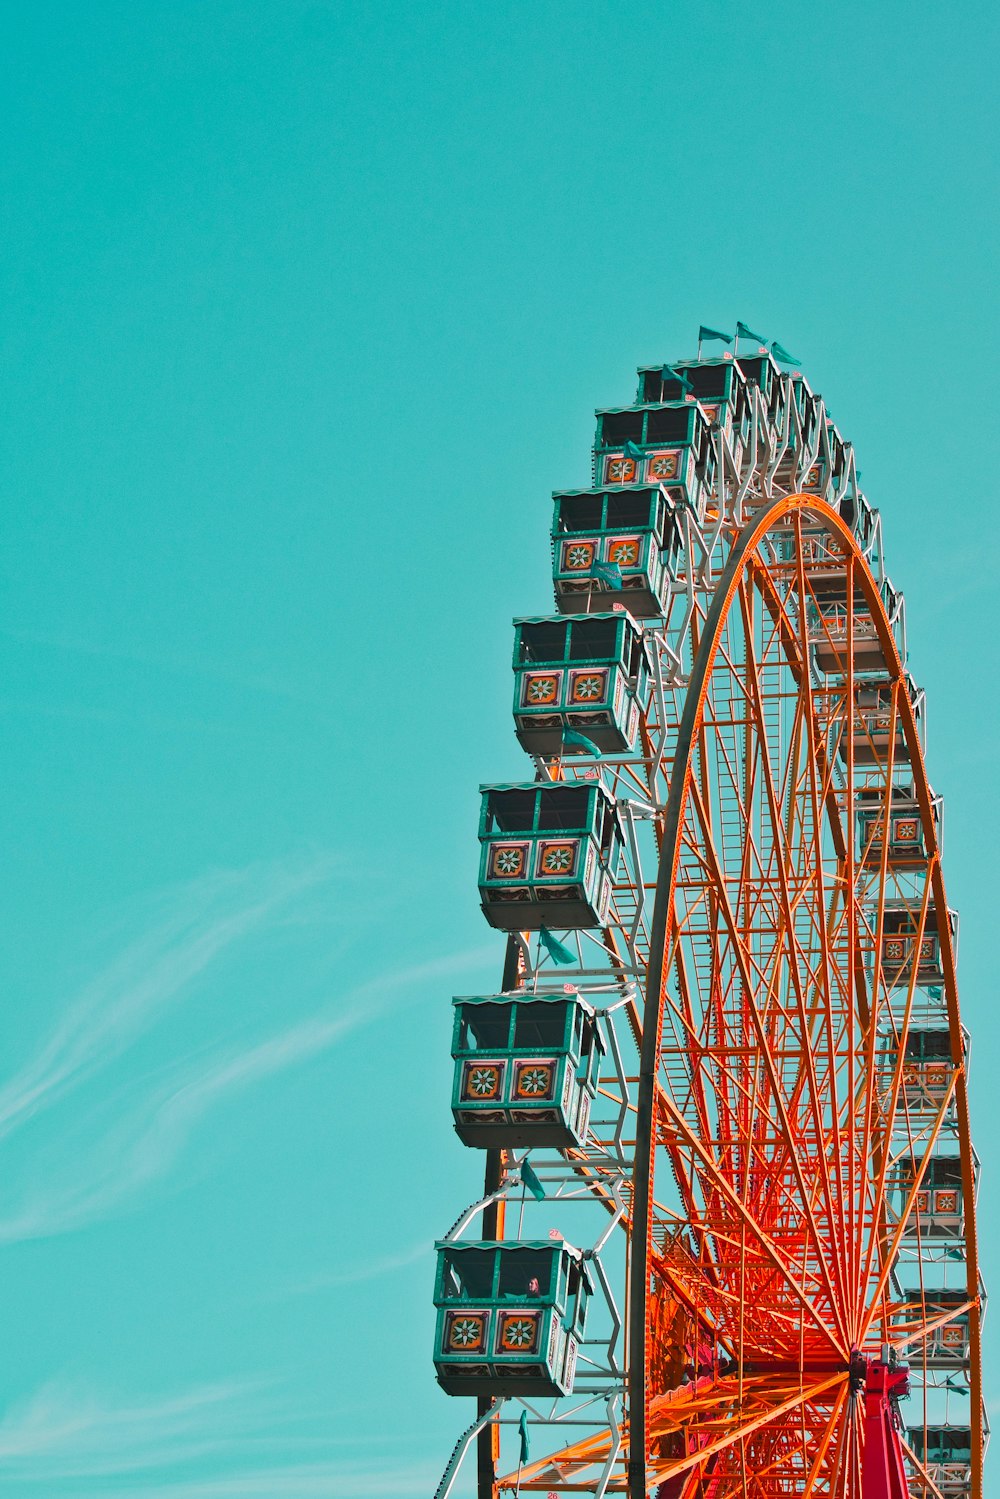 red and green ferris wheel under blue sky during daytime